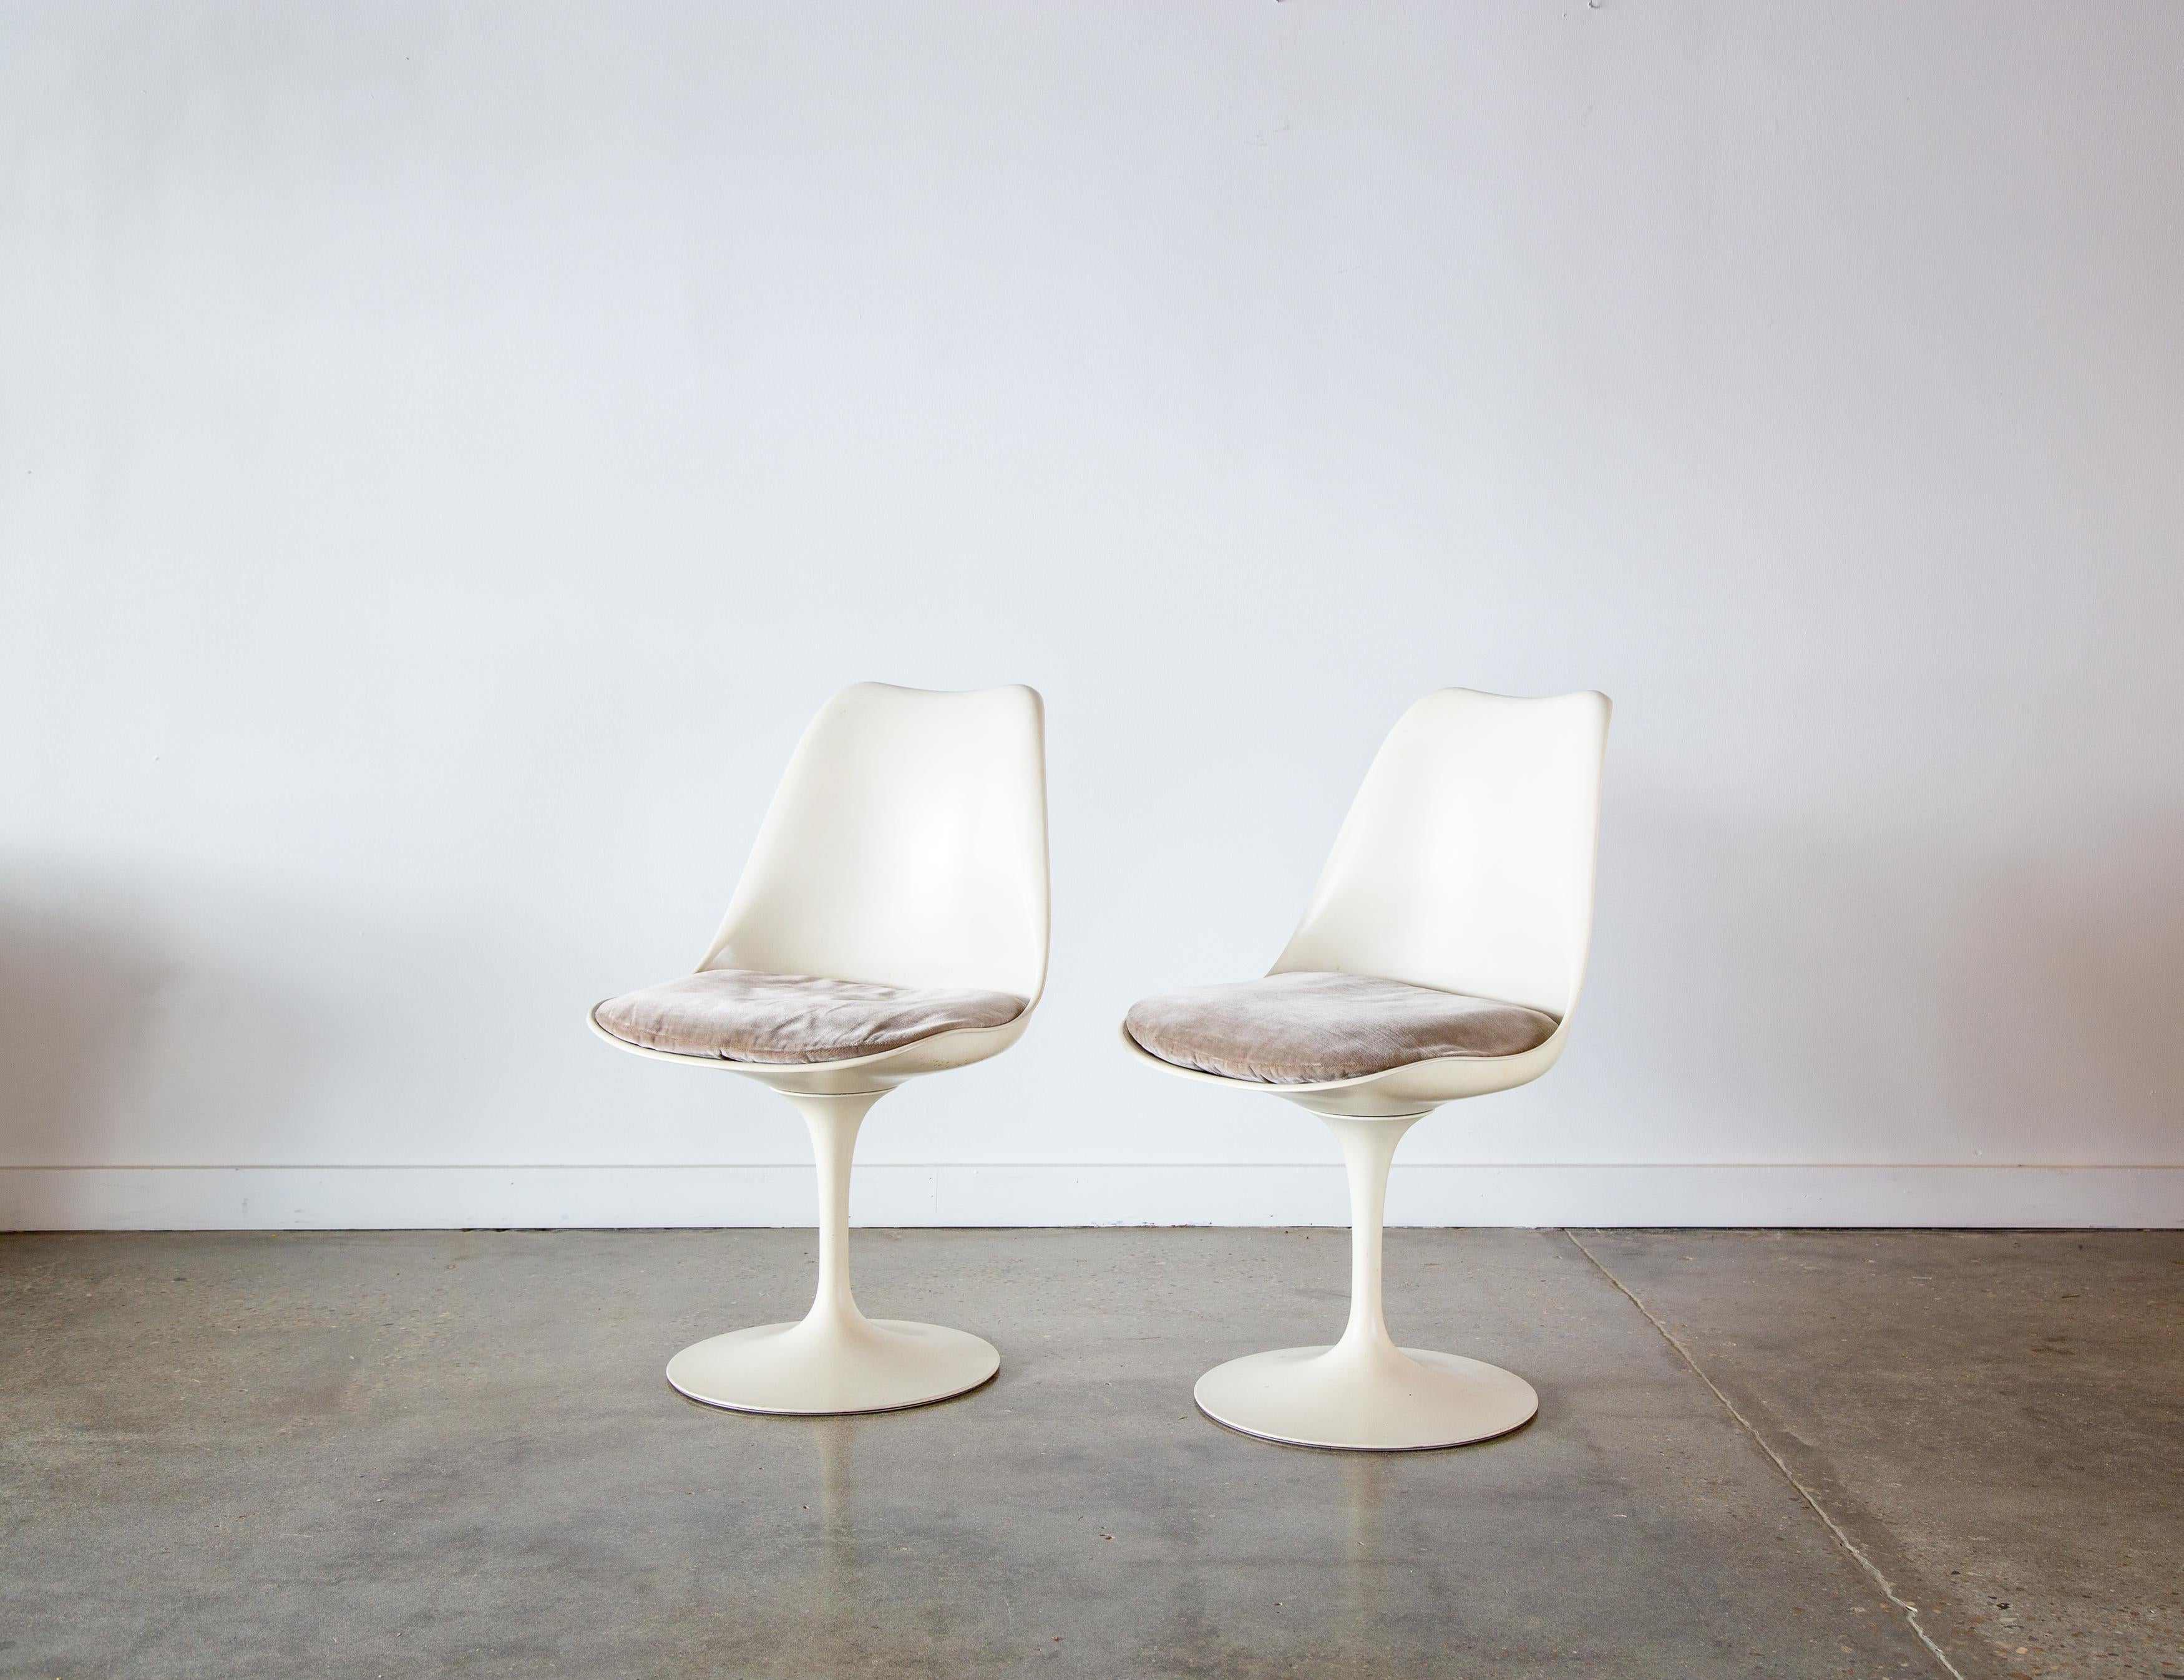 Iconic pair of tulip swivel chairs designed by Eero Saarinen for Knoll Associates.  These chairs date to the late 1950s and early 1960s as determined by the vertical bow tie label.

Condition: typical yellowing to the chairs for their age. 